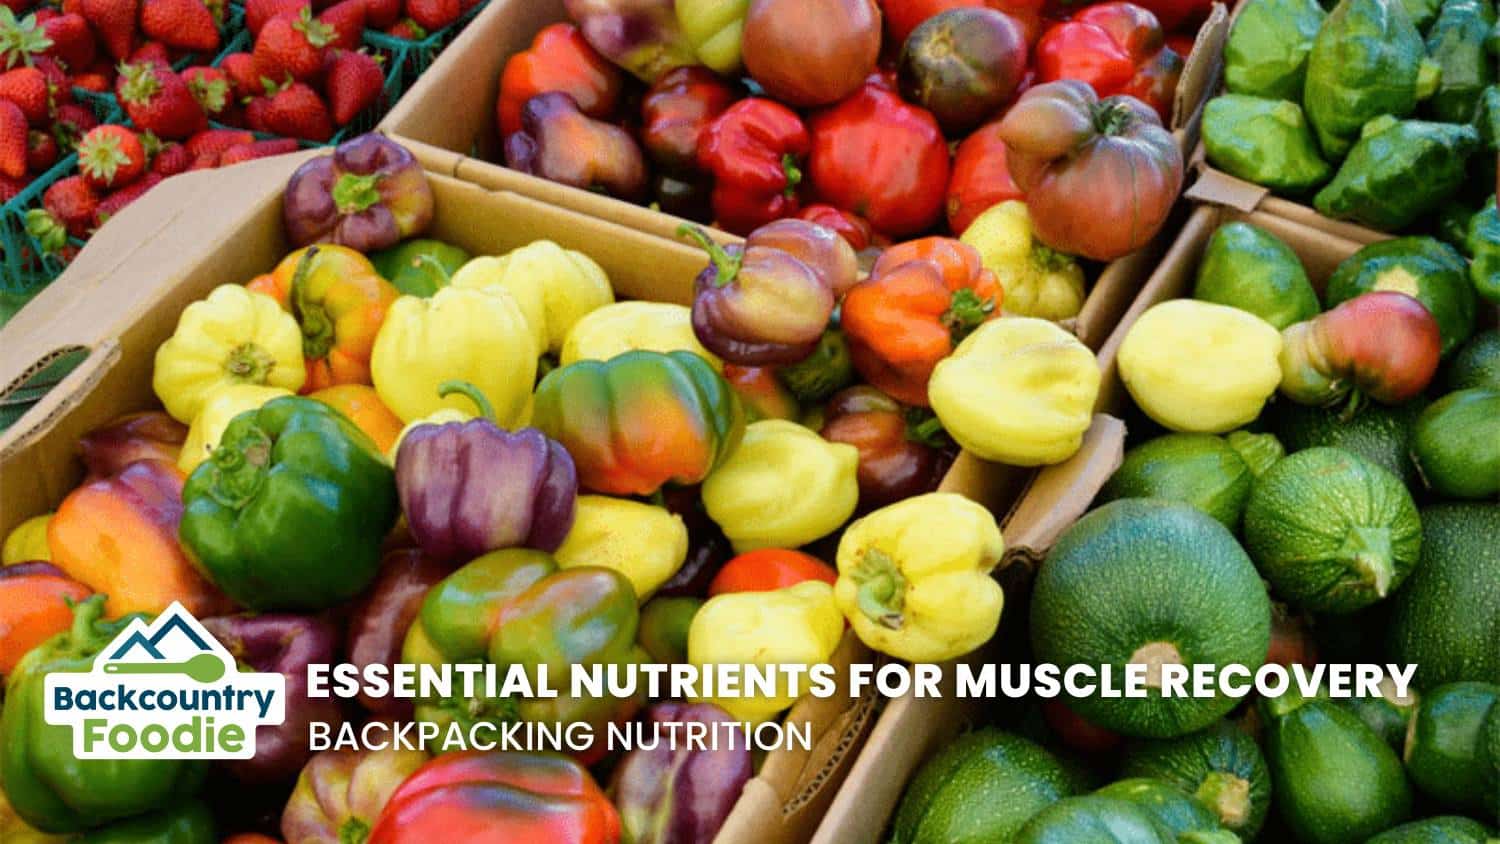 Backcountry Foodie blog Essential Nutrients for Muscle Recovery Backpacking Nutrition thumbnail image